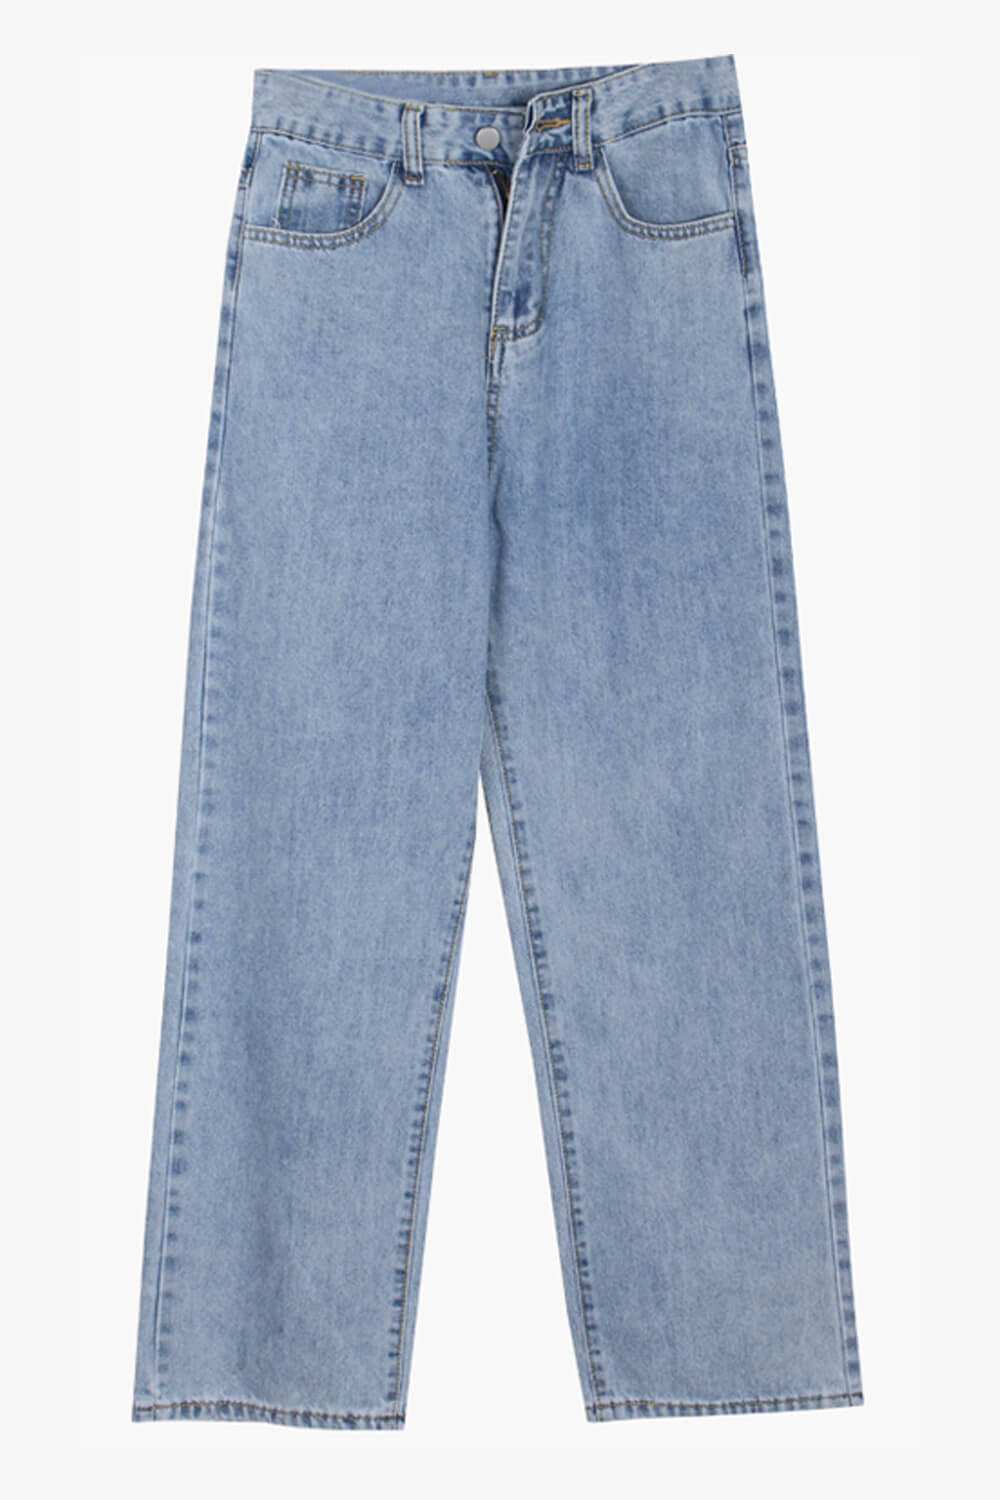 Retro Aesthetic Washed Loose Jeans